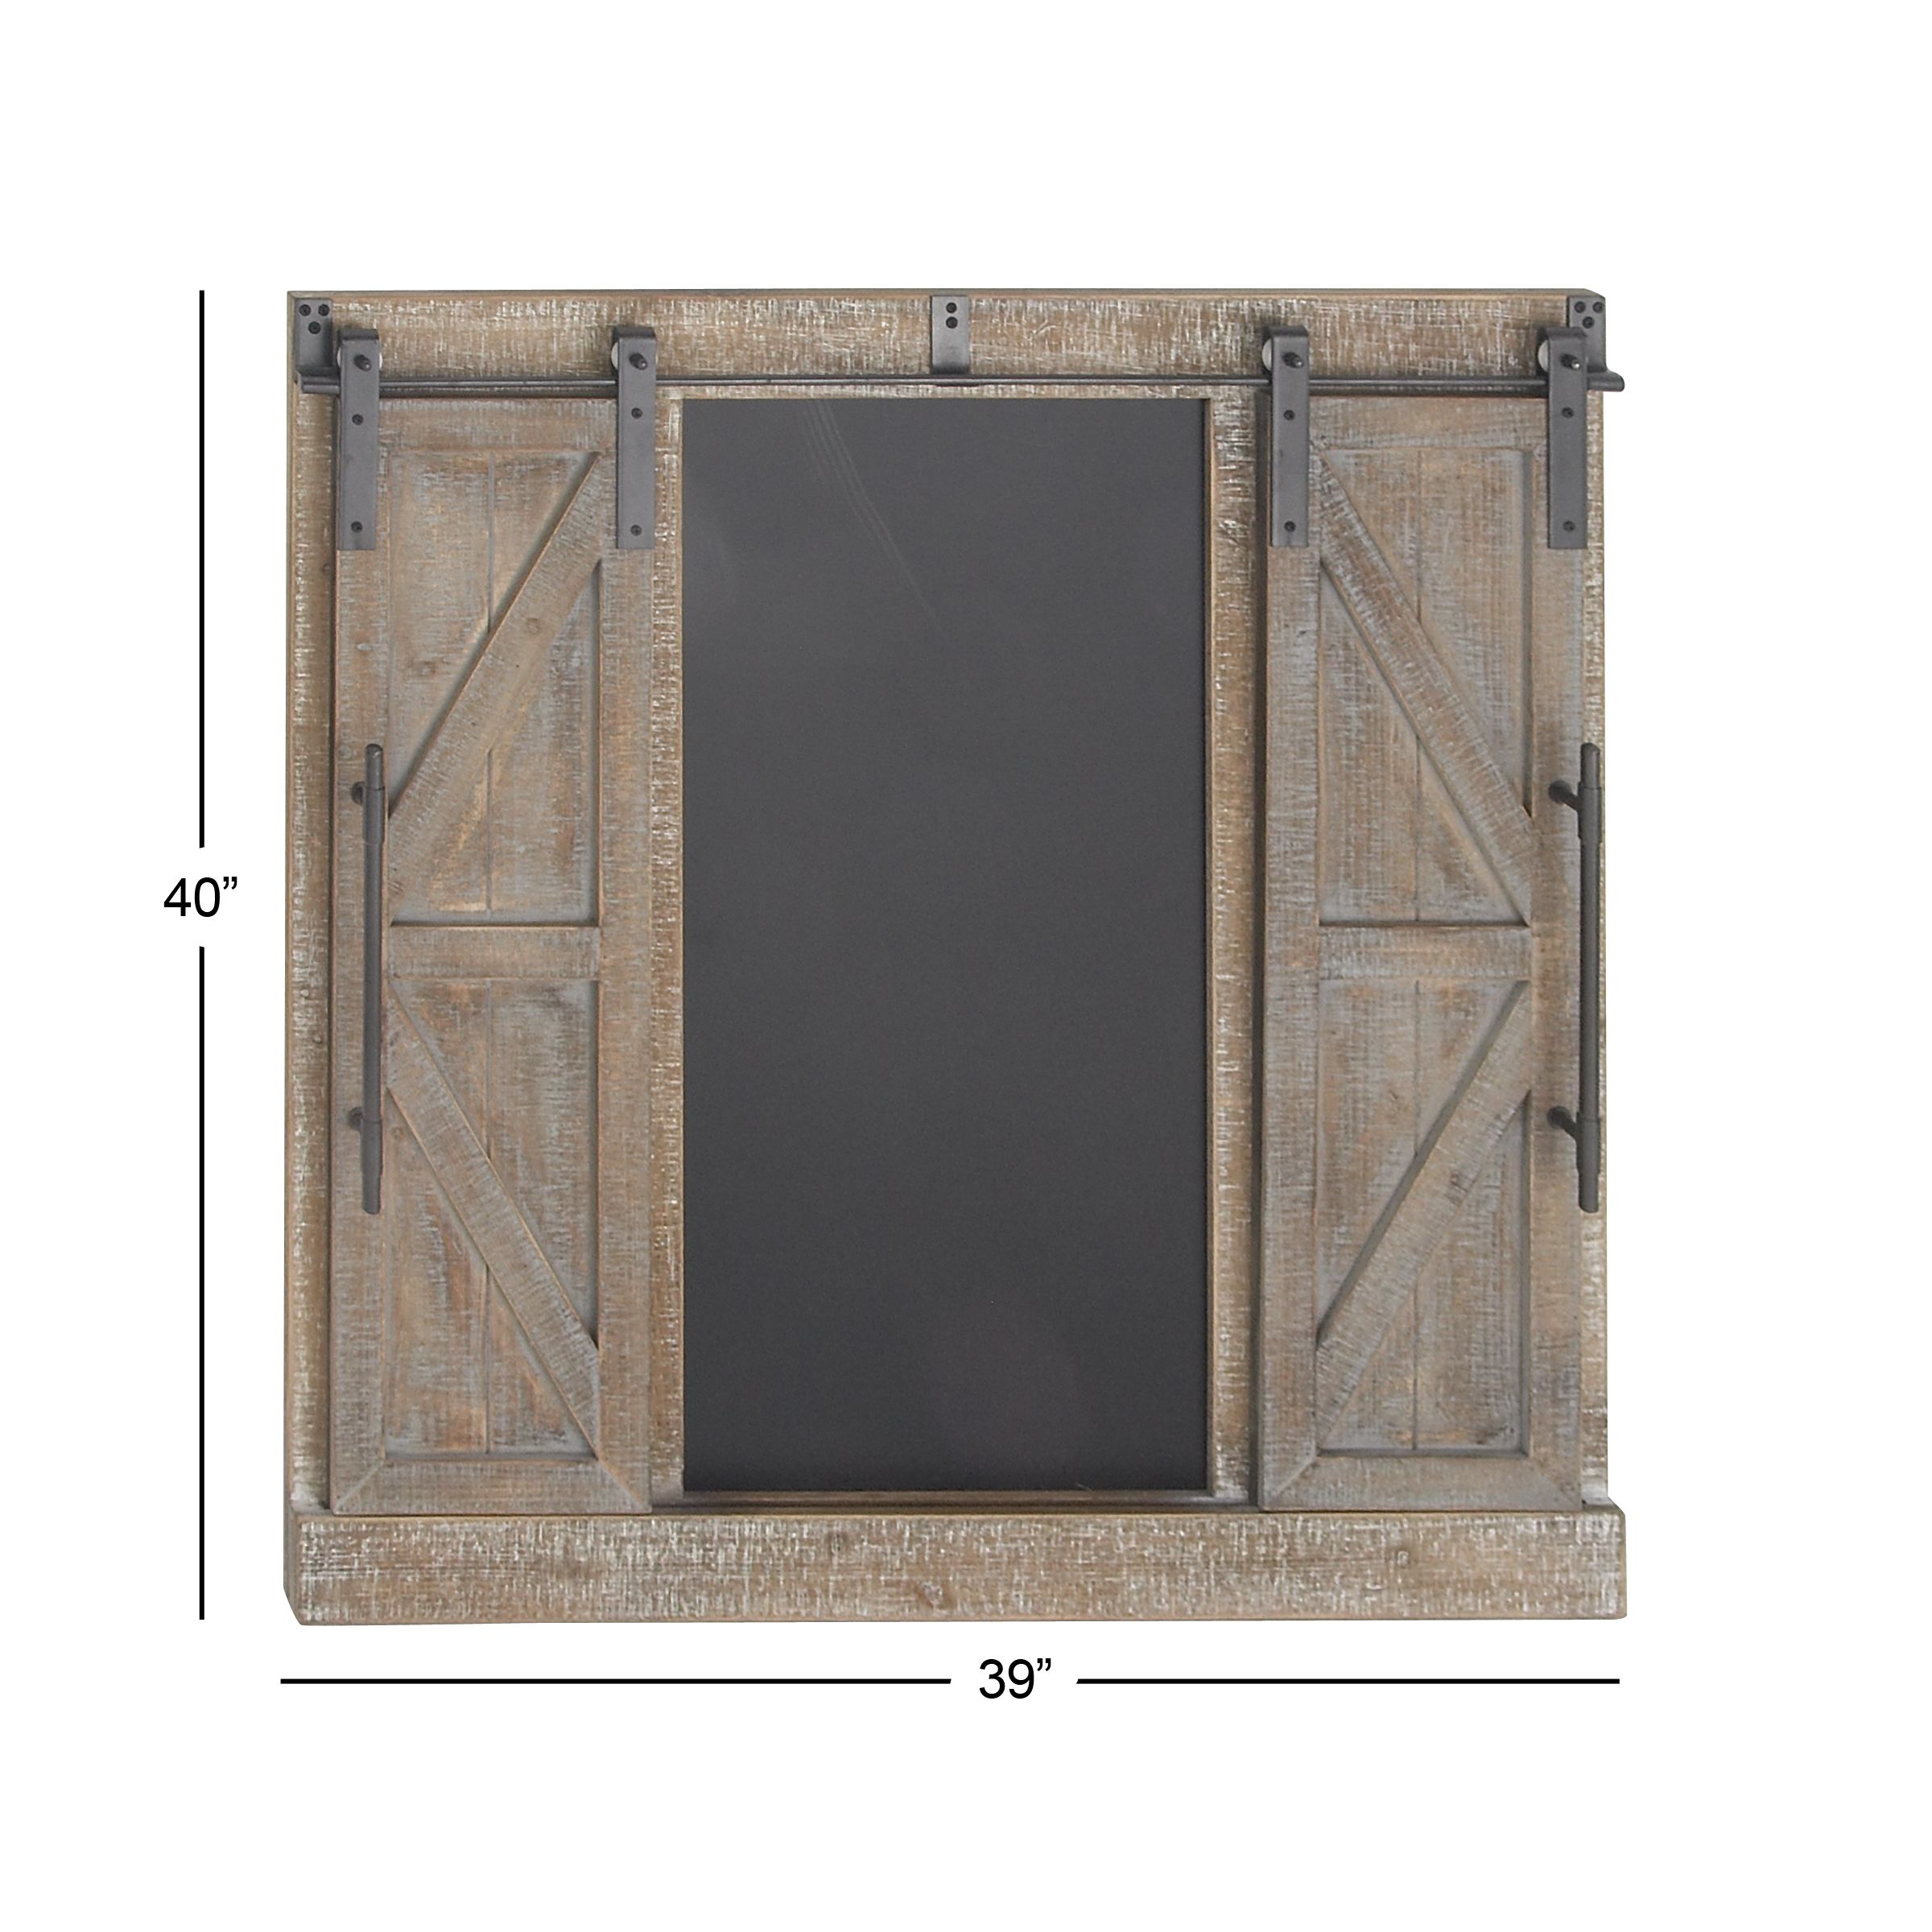 Decmode Traditional Wood And Metal Whitewashed Barn Door Wall Decor, Brown In Brown Wood And Metal Wall Decor (View 17 of 30)